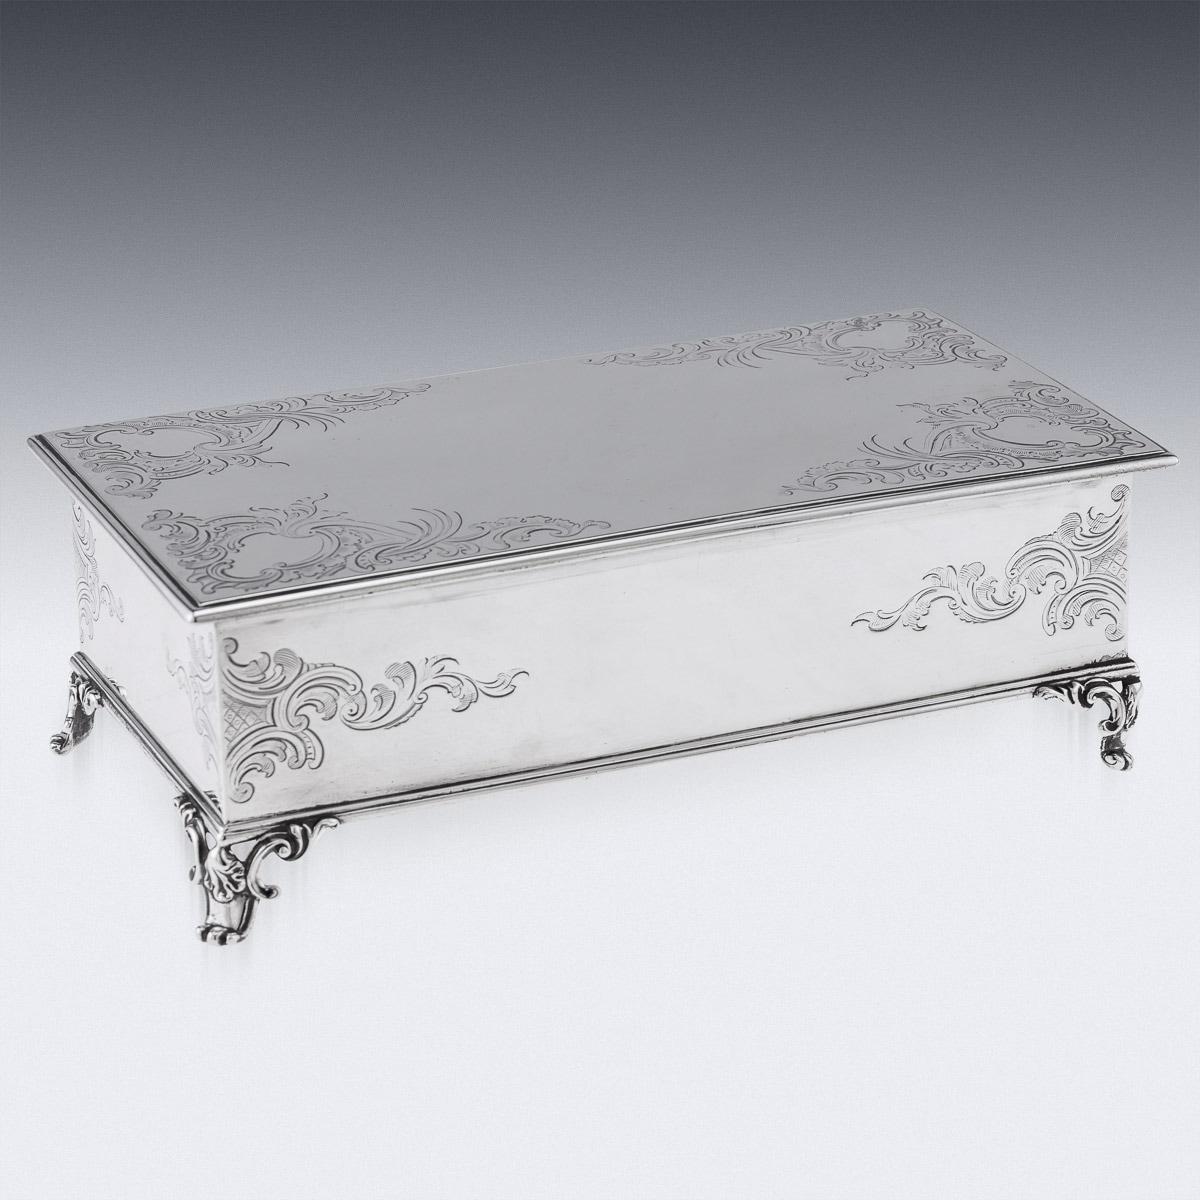 19th Century Victorian silver large lidded inkstand, of rectangular casket form, with a hindged lid, engraved with Rococo scrolls and foleage, with vacant cartooches, resting on four cast scroll feet, inside mounted wit twin cut glass and silver